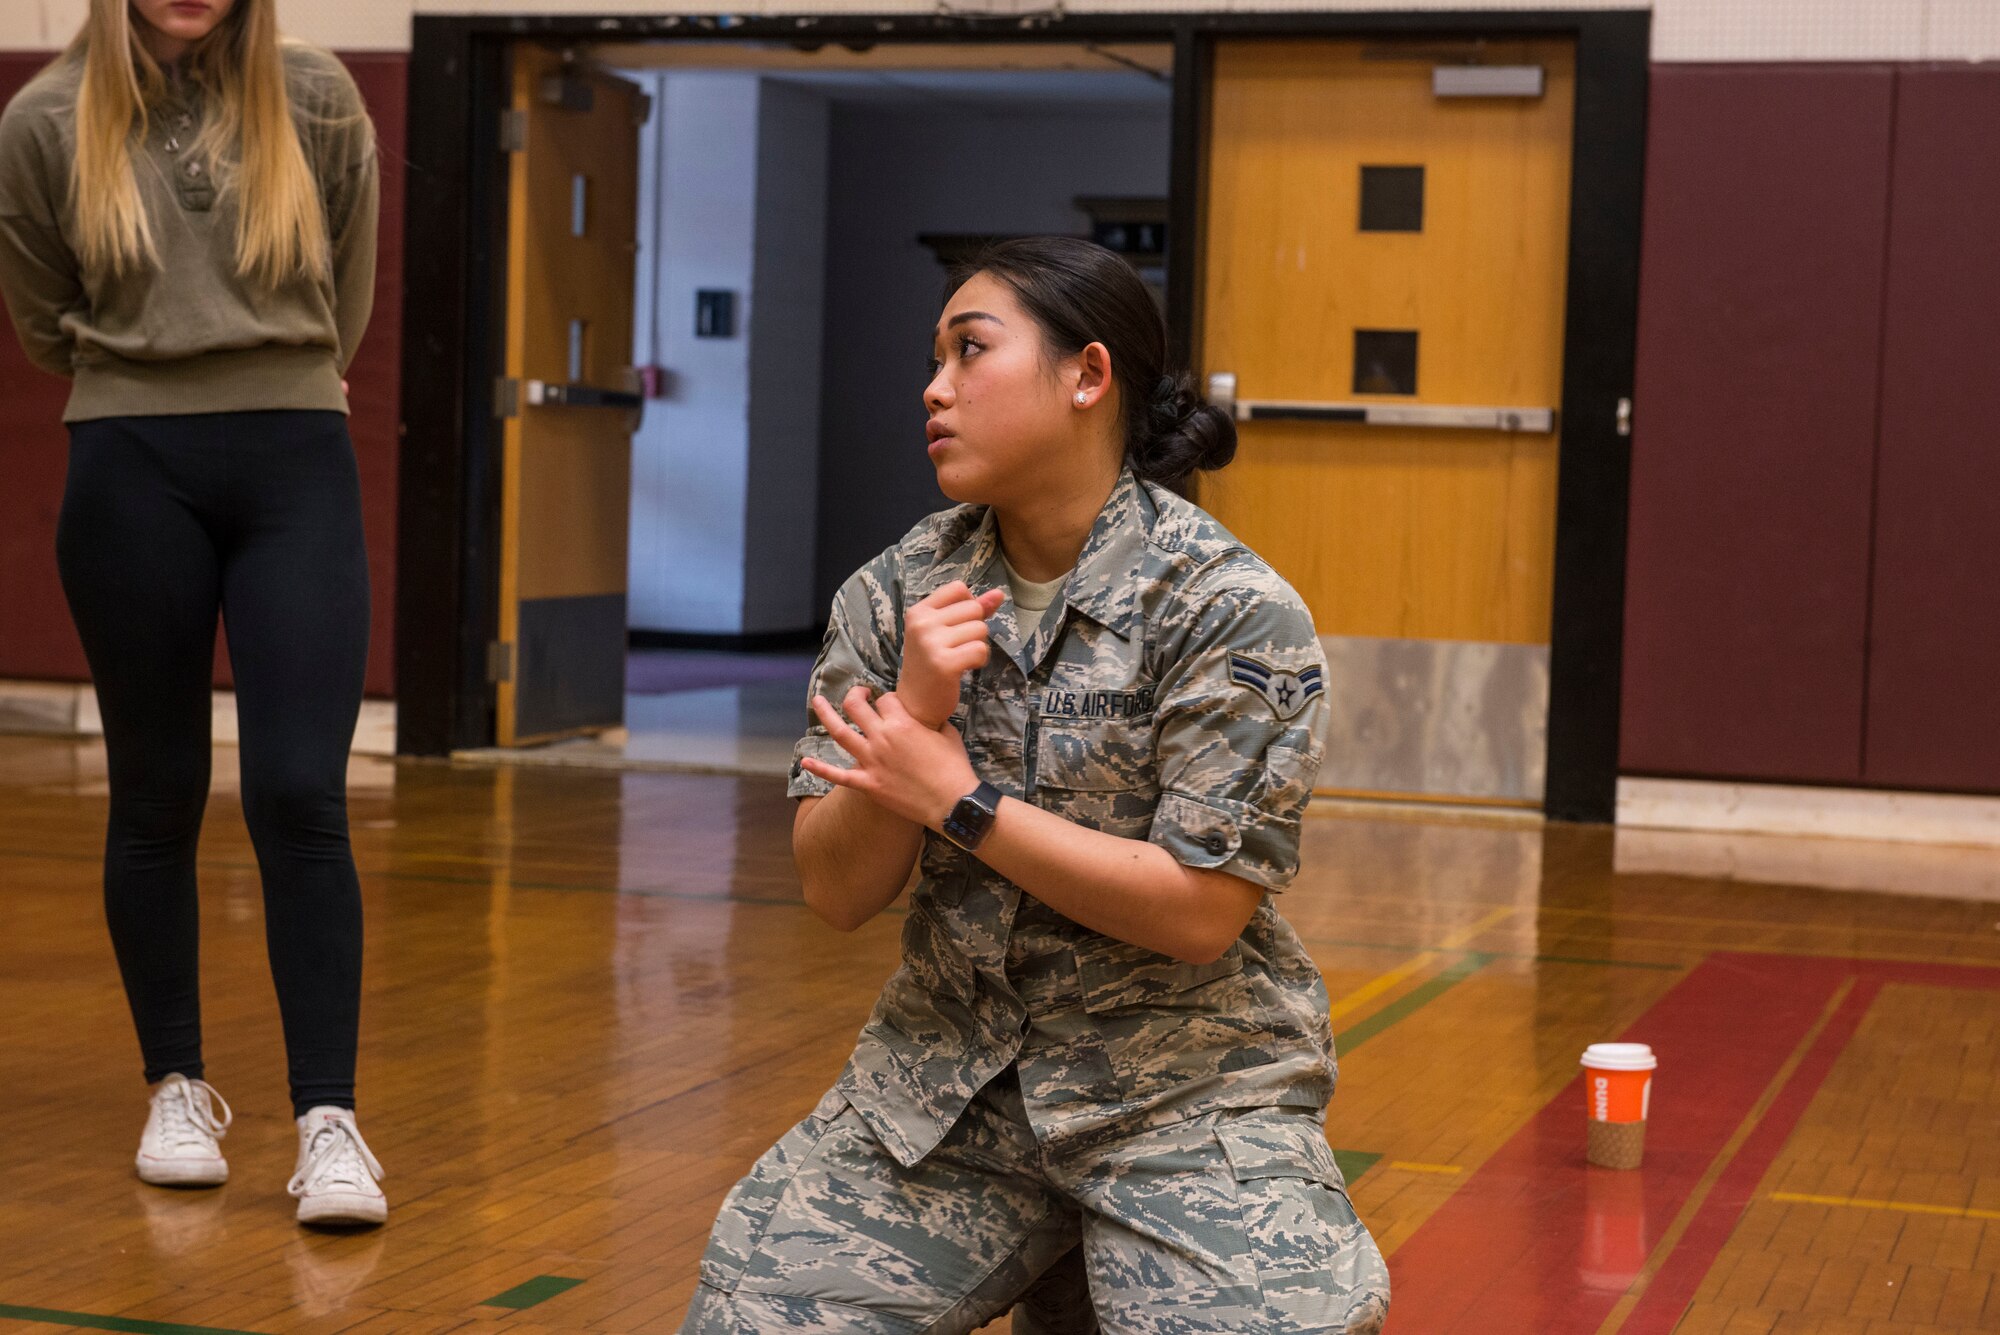 Airman 1st Class June Lee, an Aerospace Medical Technician assigned to the 103rd Medical Group, helps teach a CPR class at Torrington High School, Torrington, Conn., March 22. Airmen from the 103rd Medical Group volunteered to help students meet requirements for their physical education class. (U.S. Air National Guard photo by Staff Sgt. Steven Tucker)